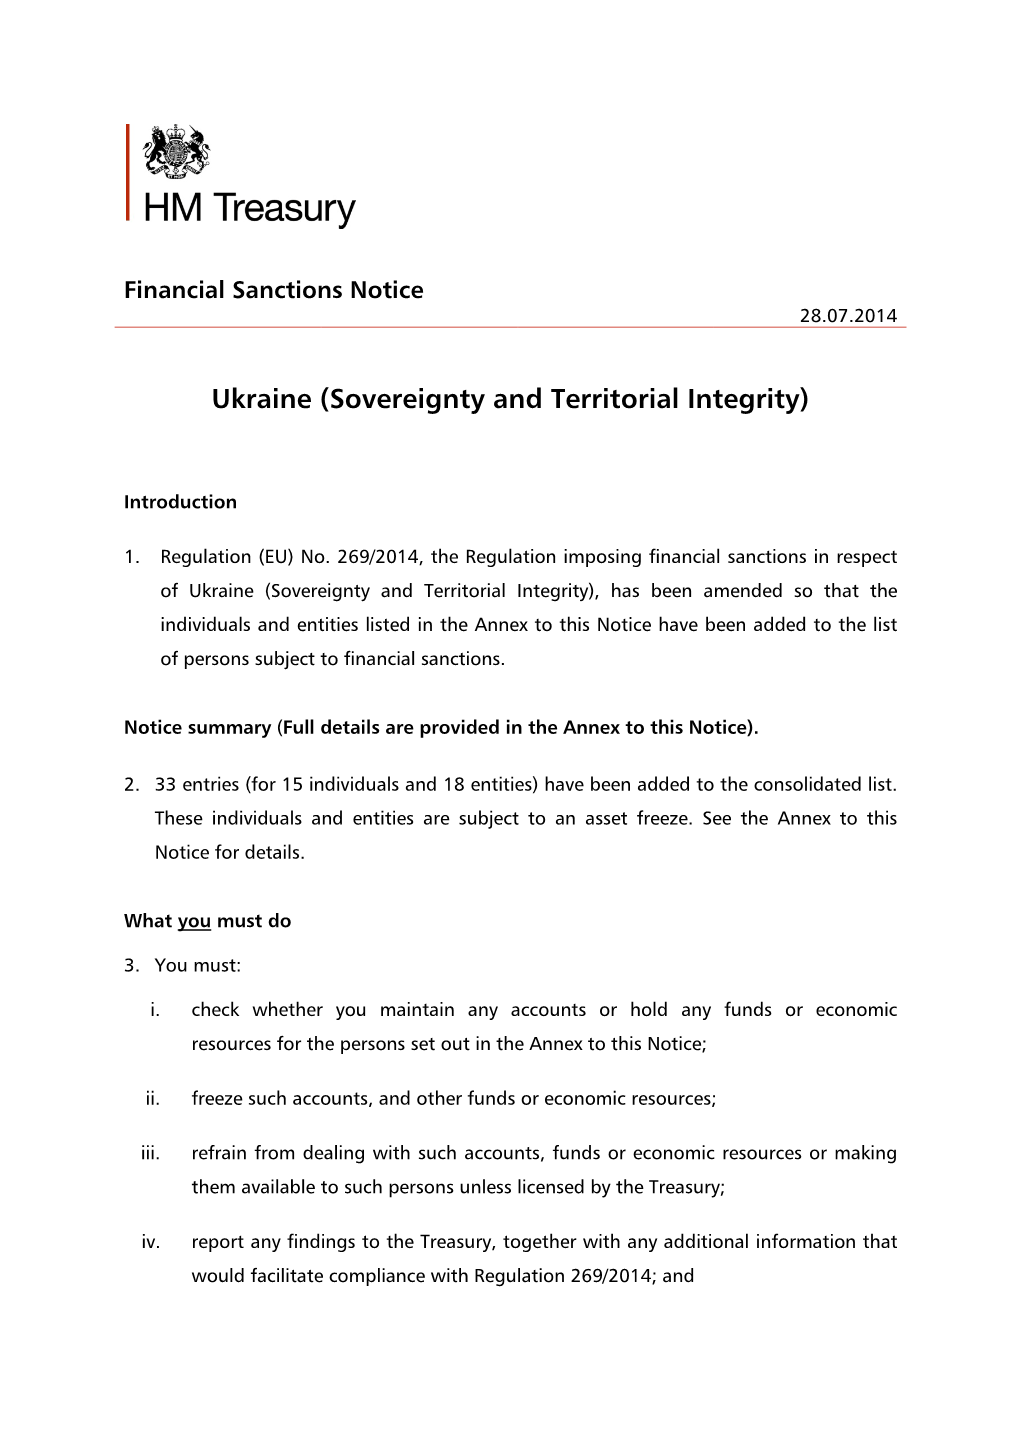 Ukraine (Sovereignty and Territorial Integrity)